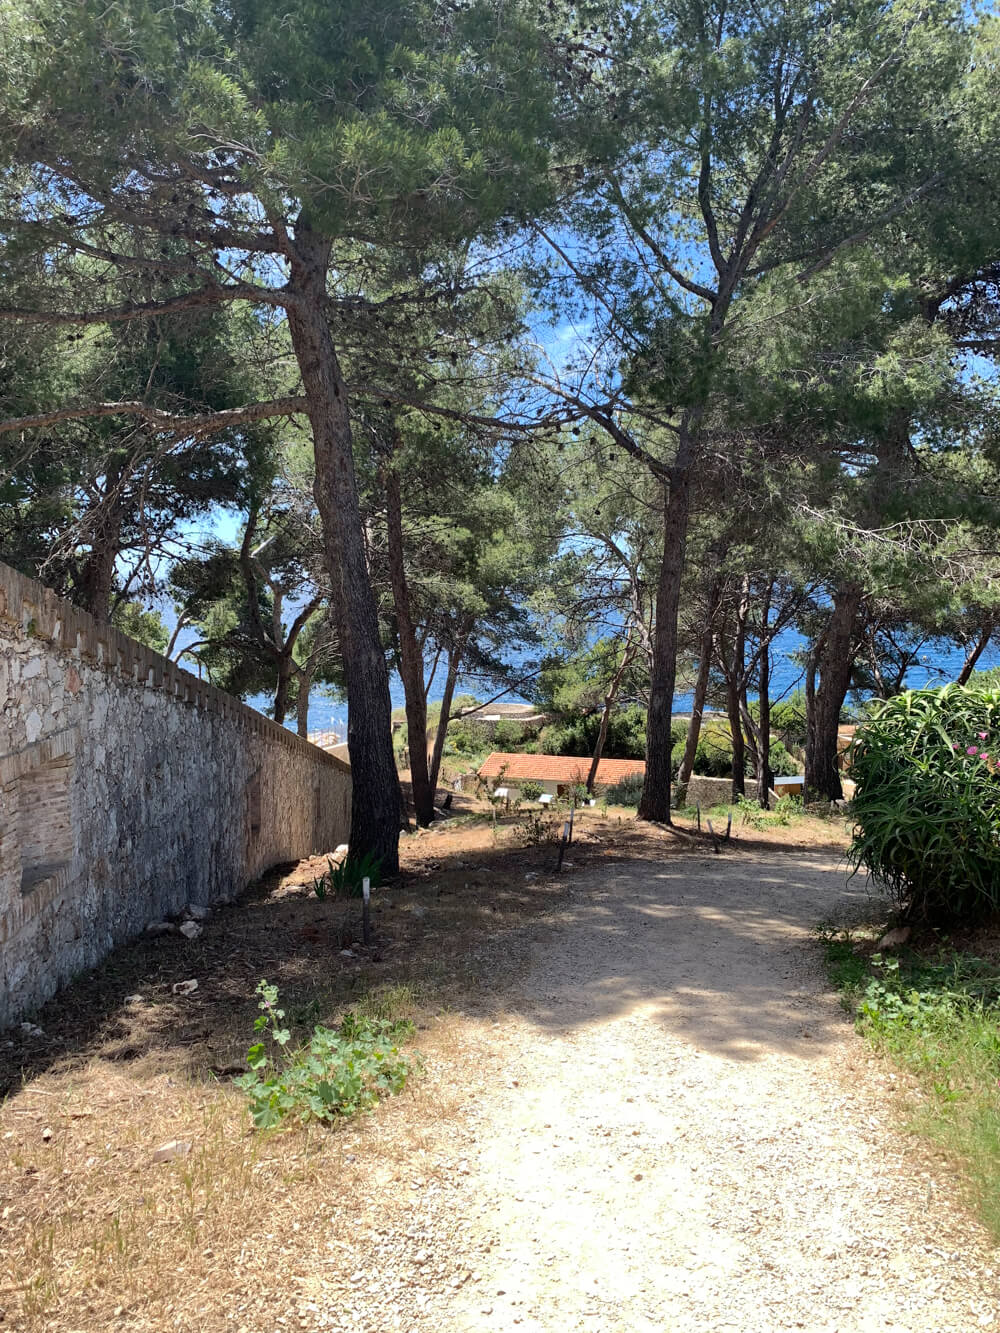 Wooded area behind the tower, Batterie du Graillon, Cap d'Antibes, France by Cattie Coyle Photography